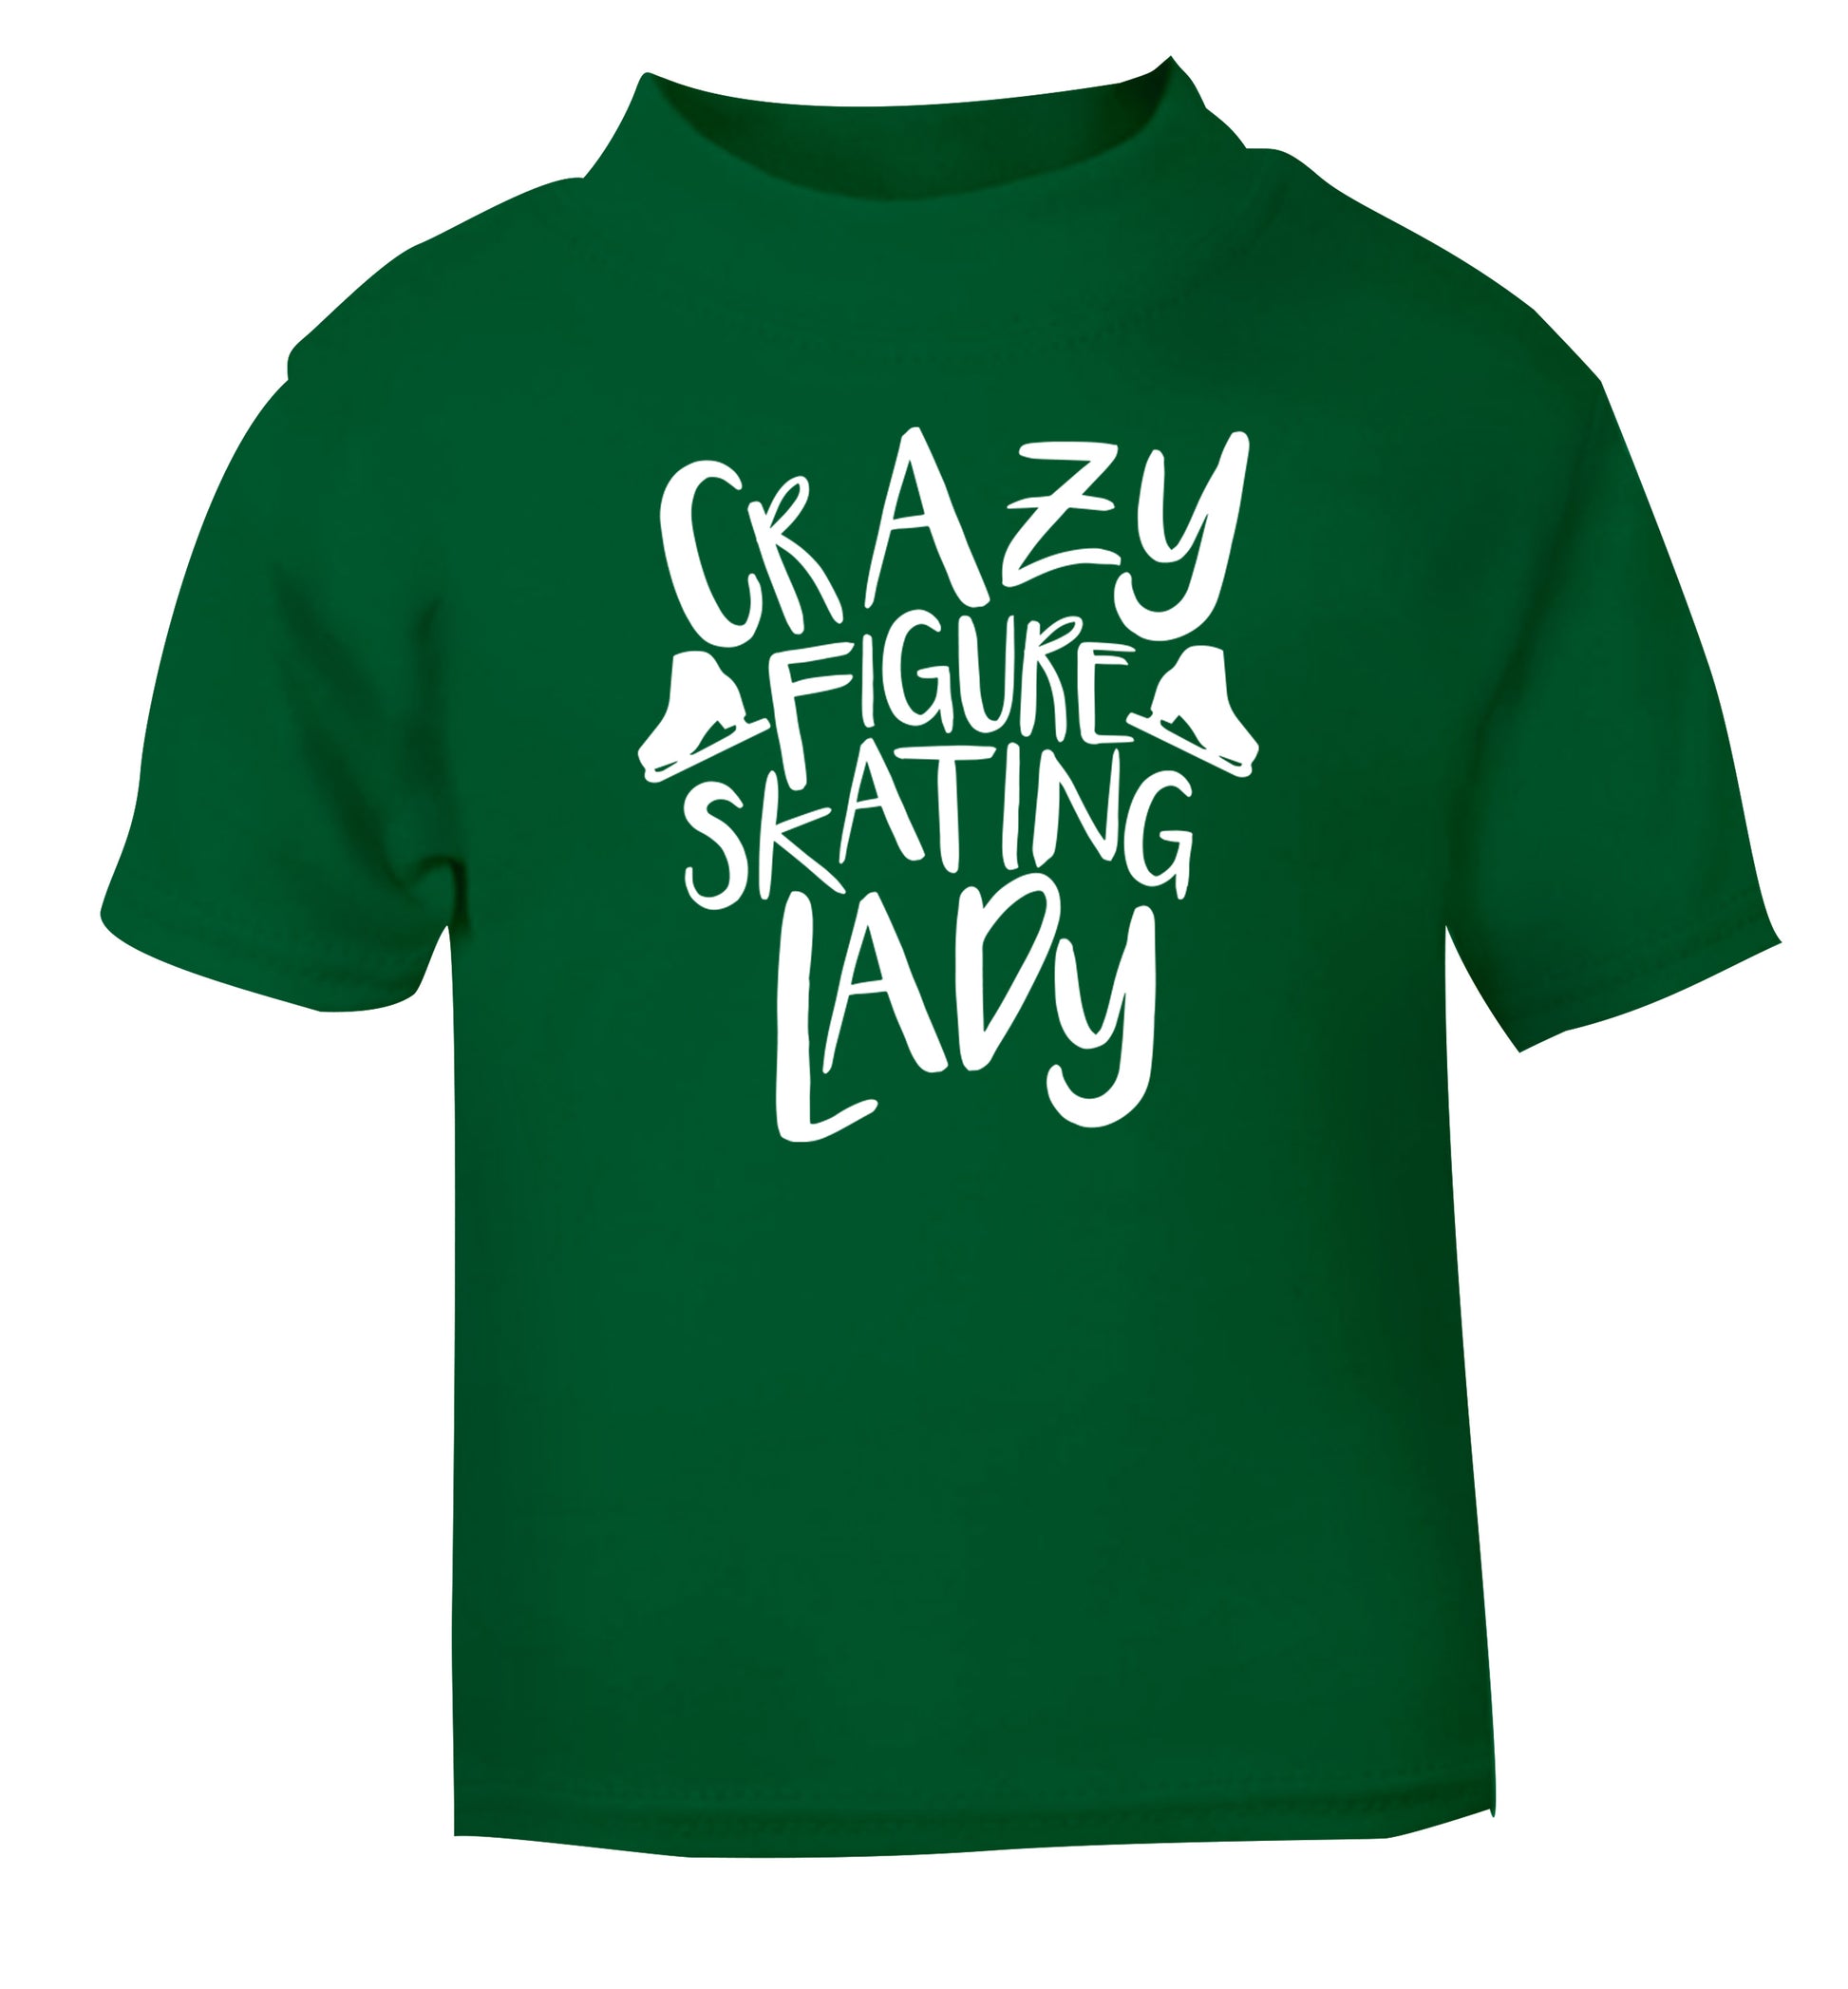 Crazy figure skating lady green Baby Toddler Tshirt 2 Years